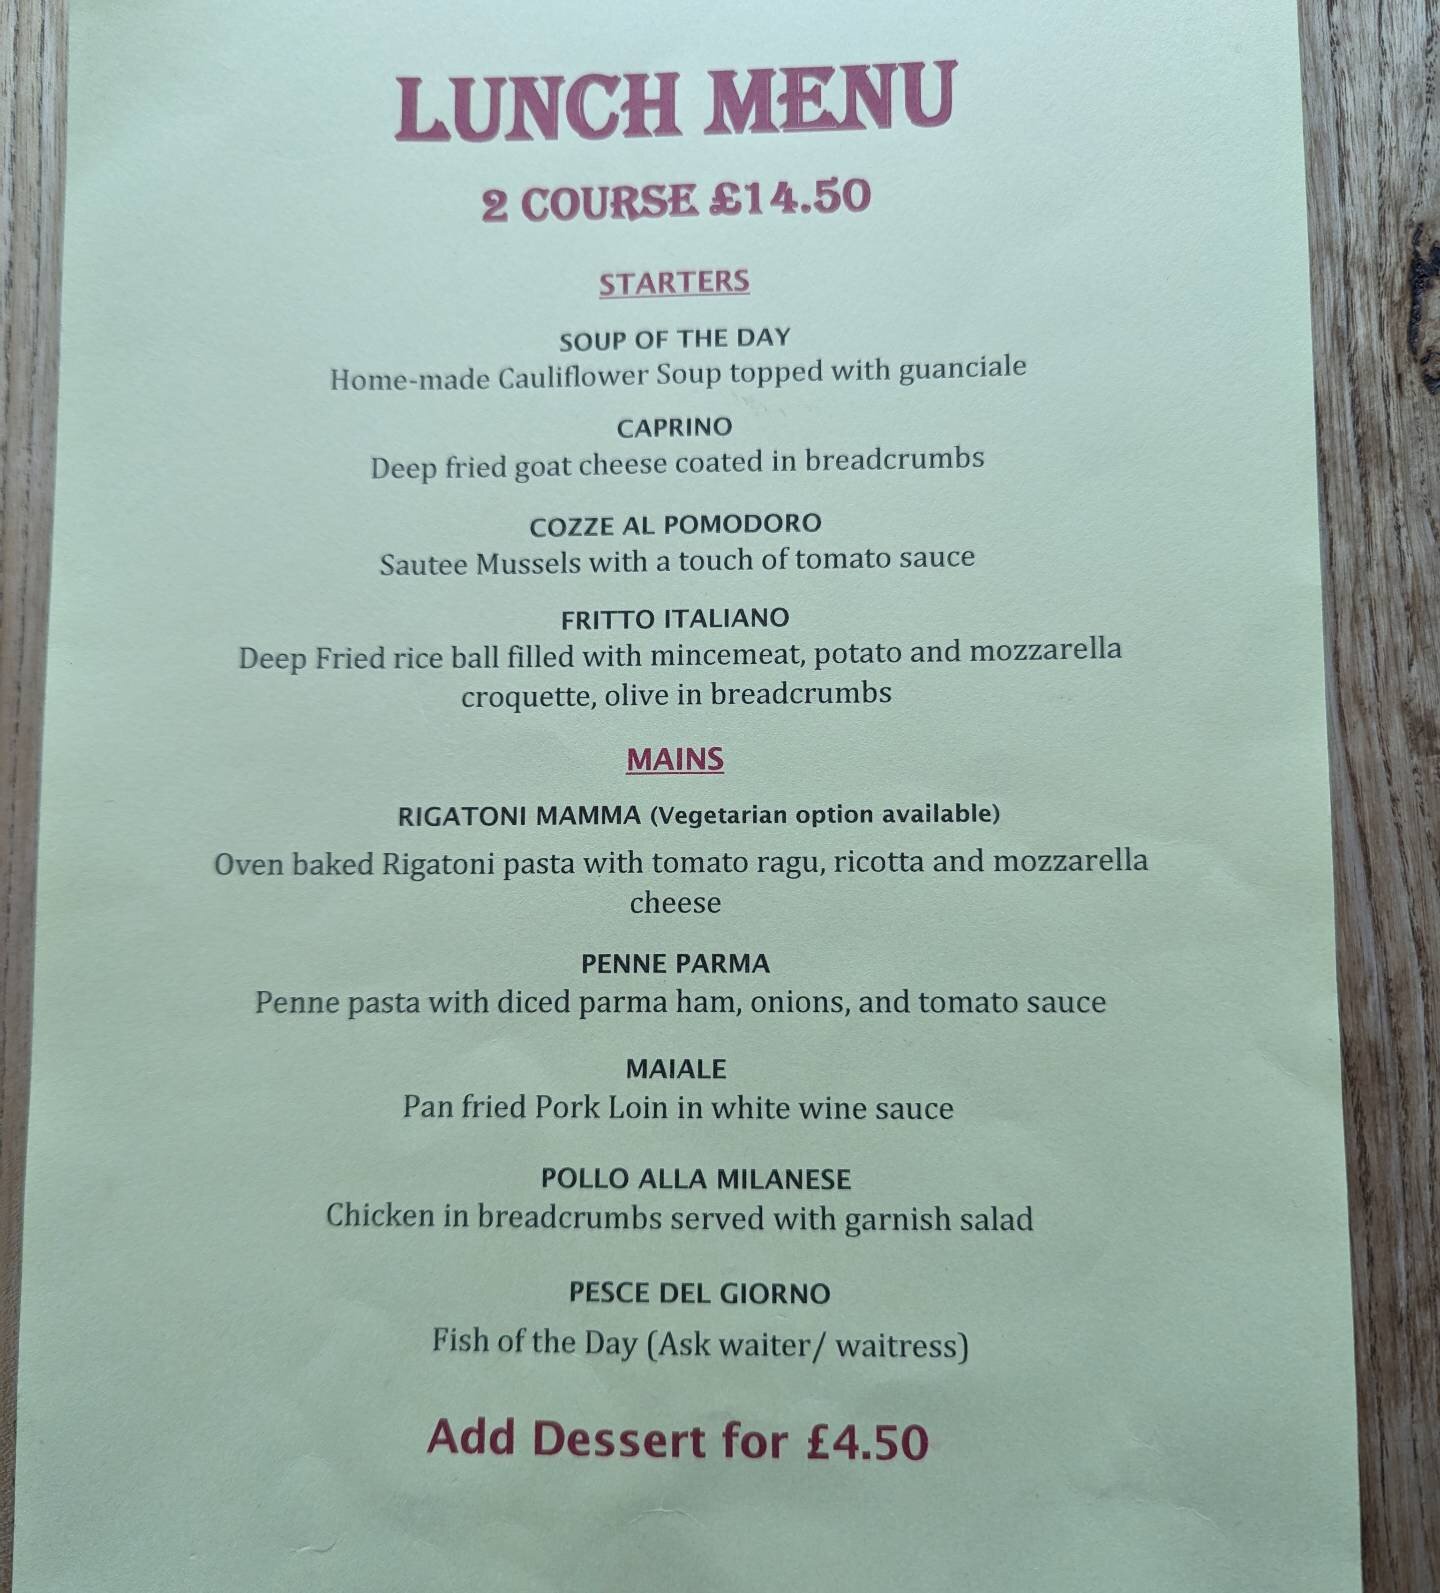 Our lunch menu is available every Tuesday, Thursday and Friday, Broadstairs only ( please note the menu may have slight changes) 😊 #posilliporestaurant #italianfoodbloggers #italianfood #italianfoodlover #italianfoodporn #realitalianfood #cucinaital